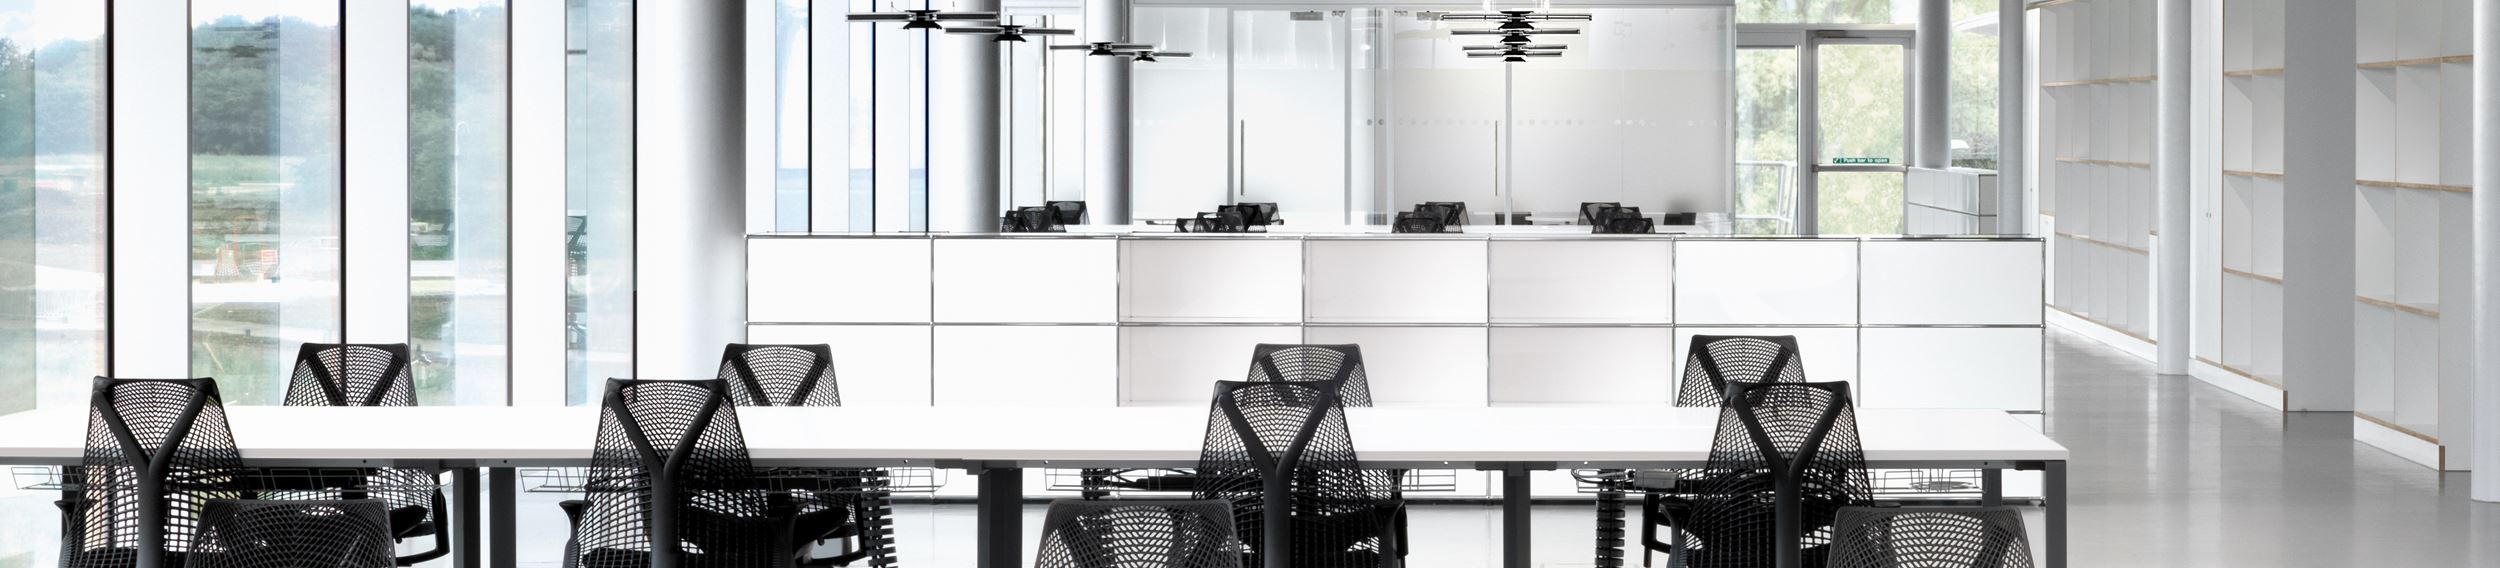 Dyson India office